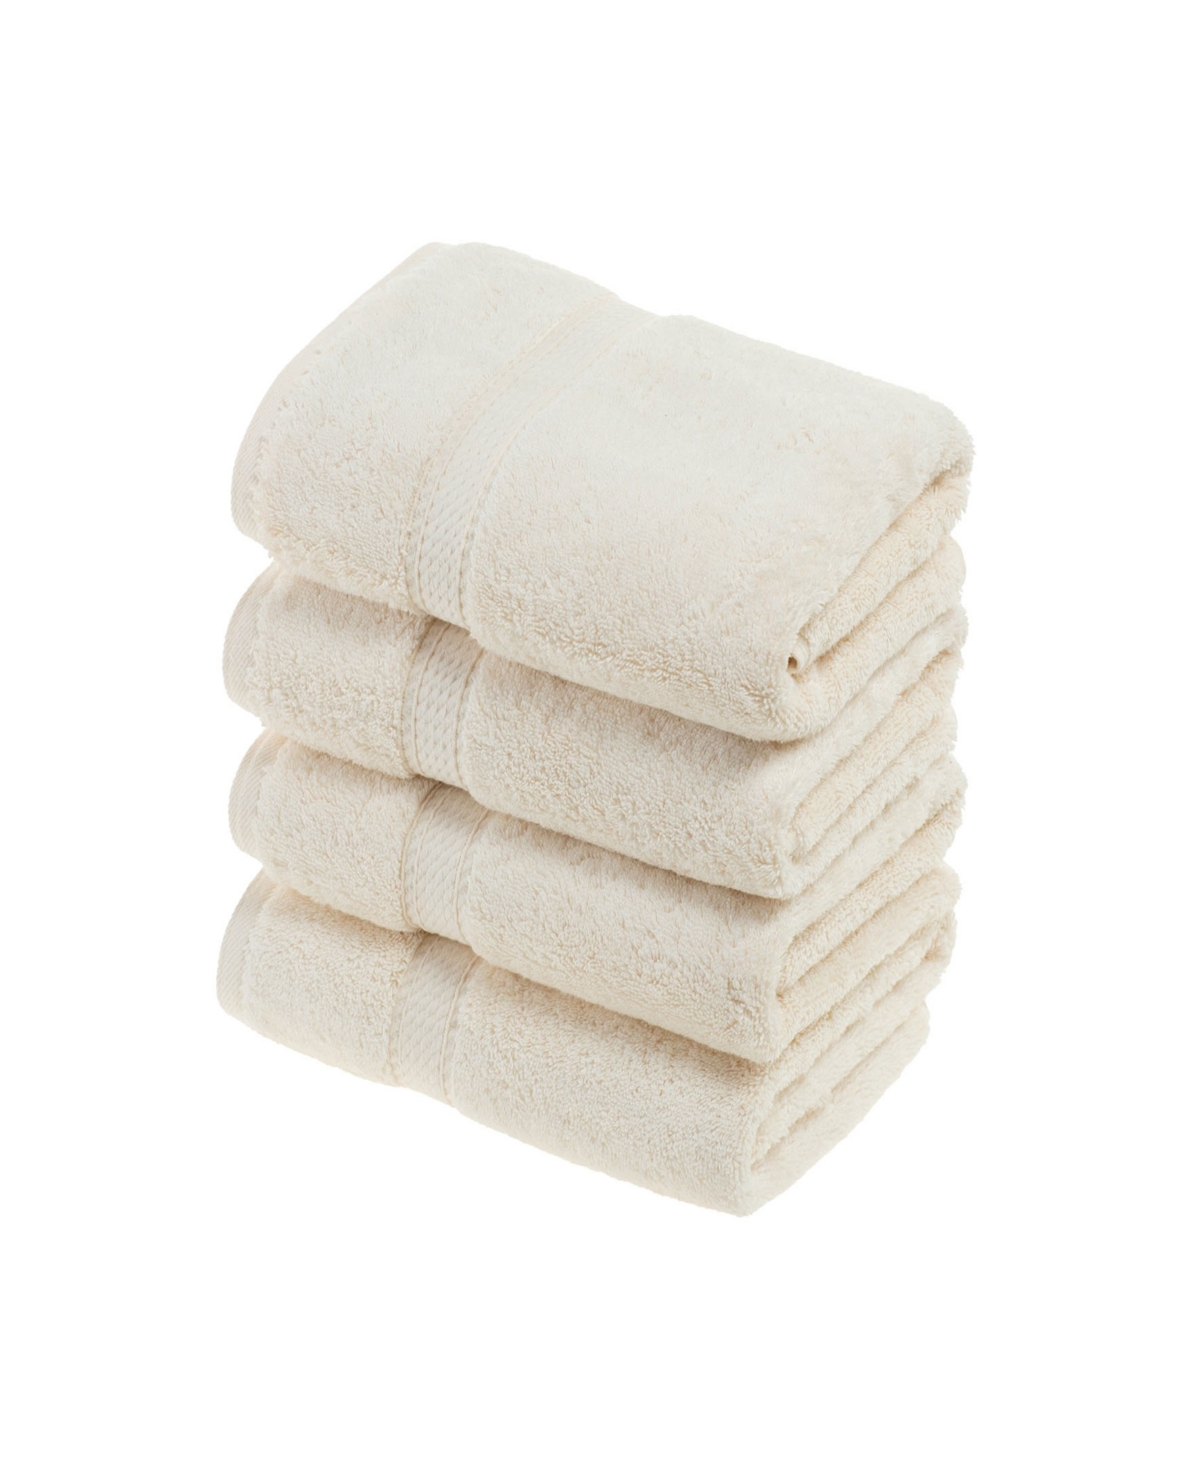 Superior Highly Absorbent 4 Piece Egyptian Cotton Ultra Plush Solid Hand Towel Set Bedding In Cream